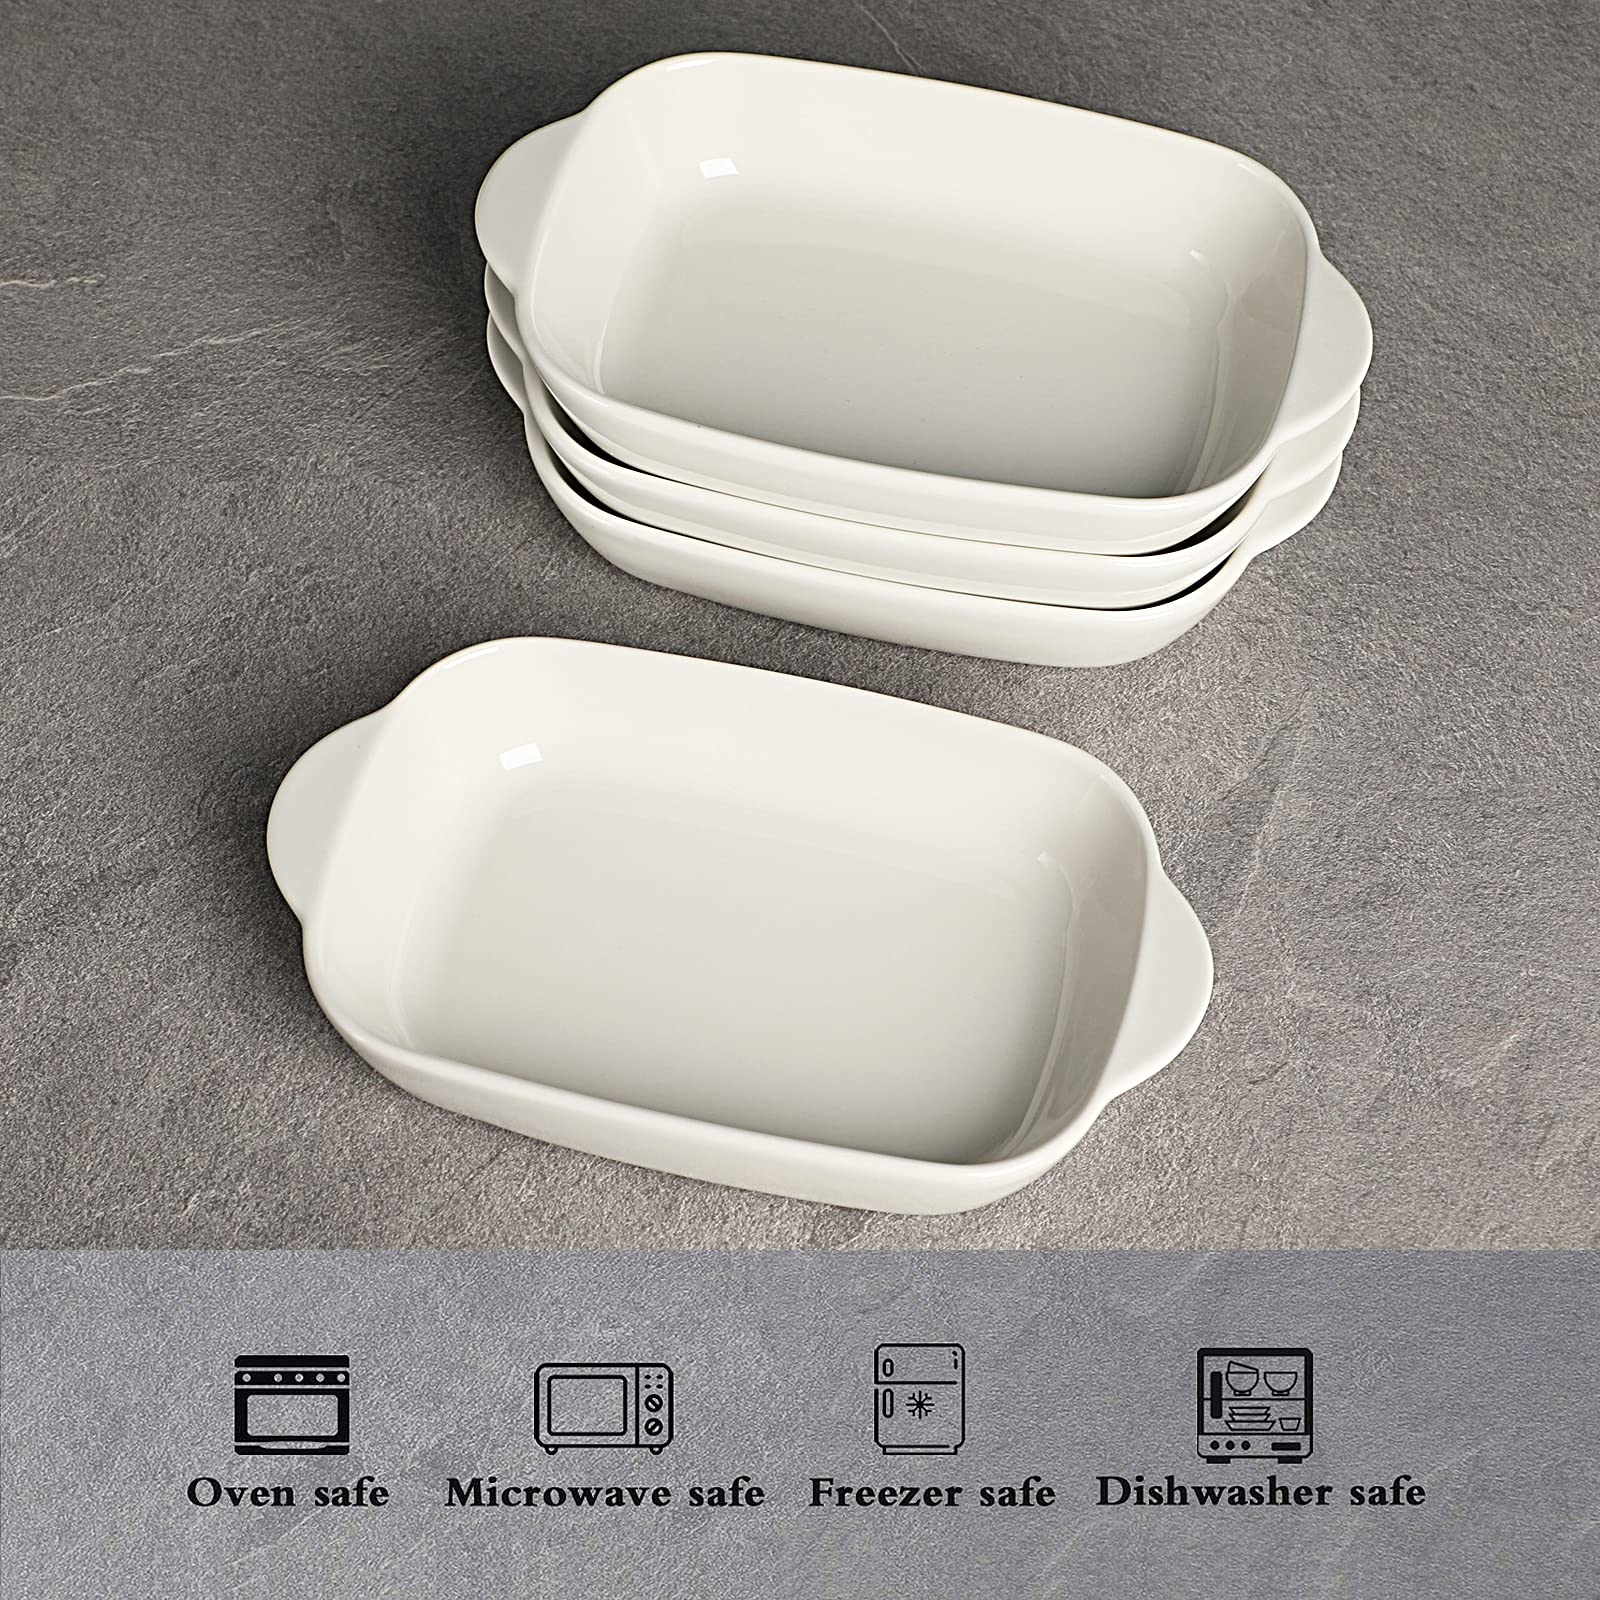 LEETOYI Ceramic Small Baking Dish 7.5-Inch Set of 4, Rectangular Bakeware with Double Handle, Baking Pans for Cooking and Cake Dinner (White)